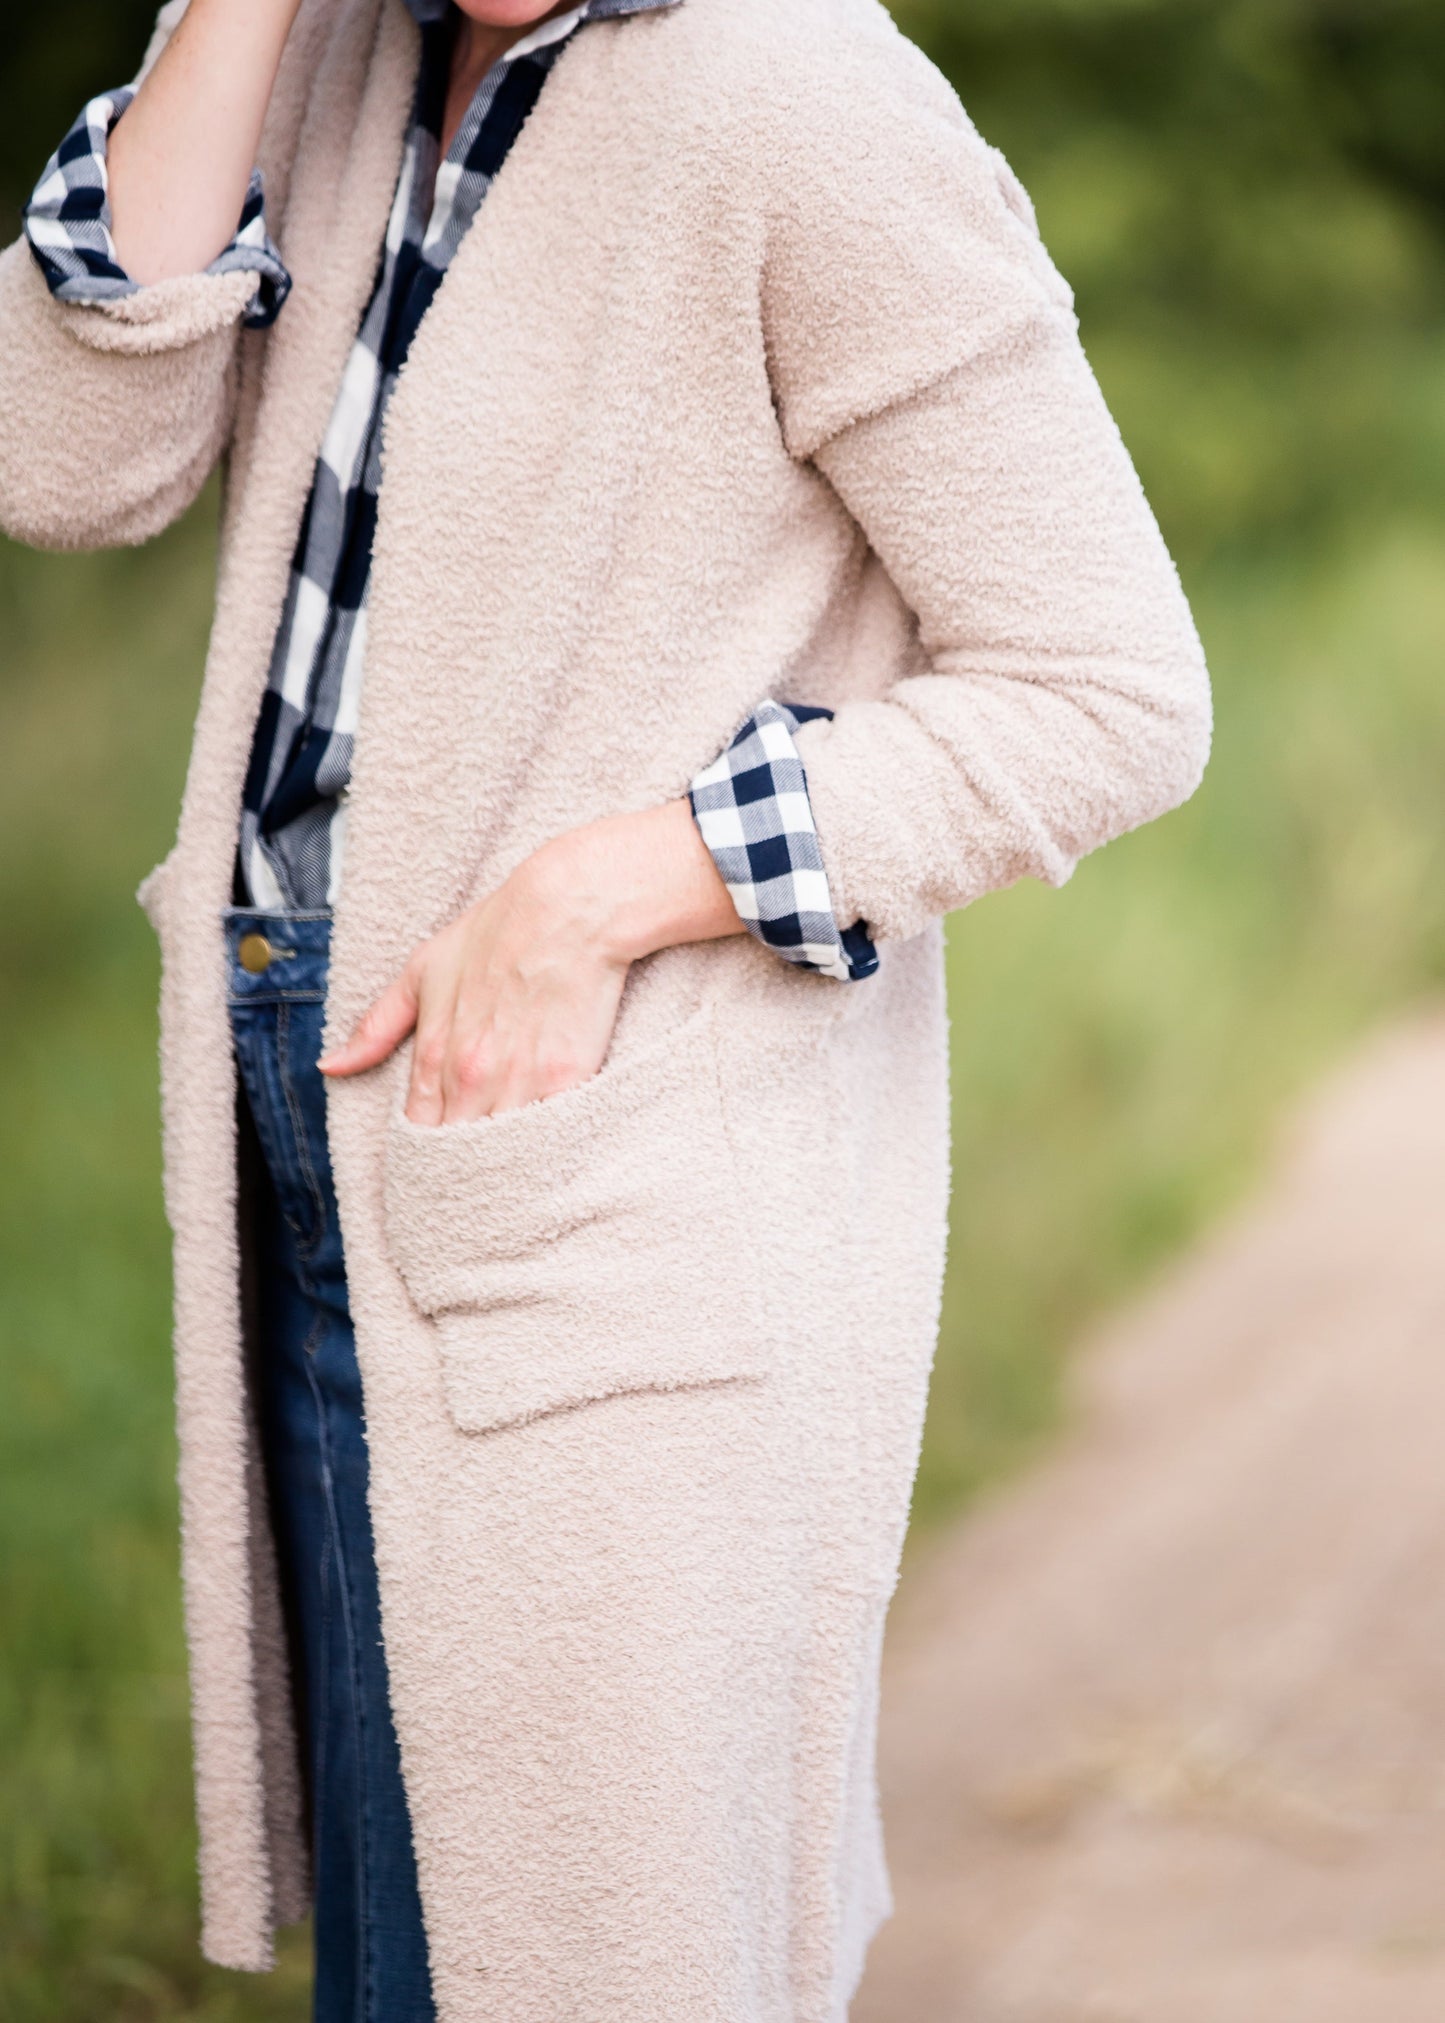 cozy sherpa long duster cardigan in taupe